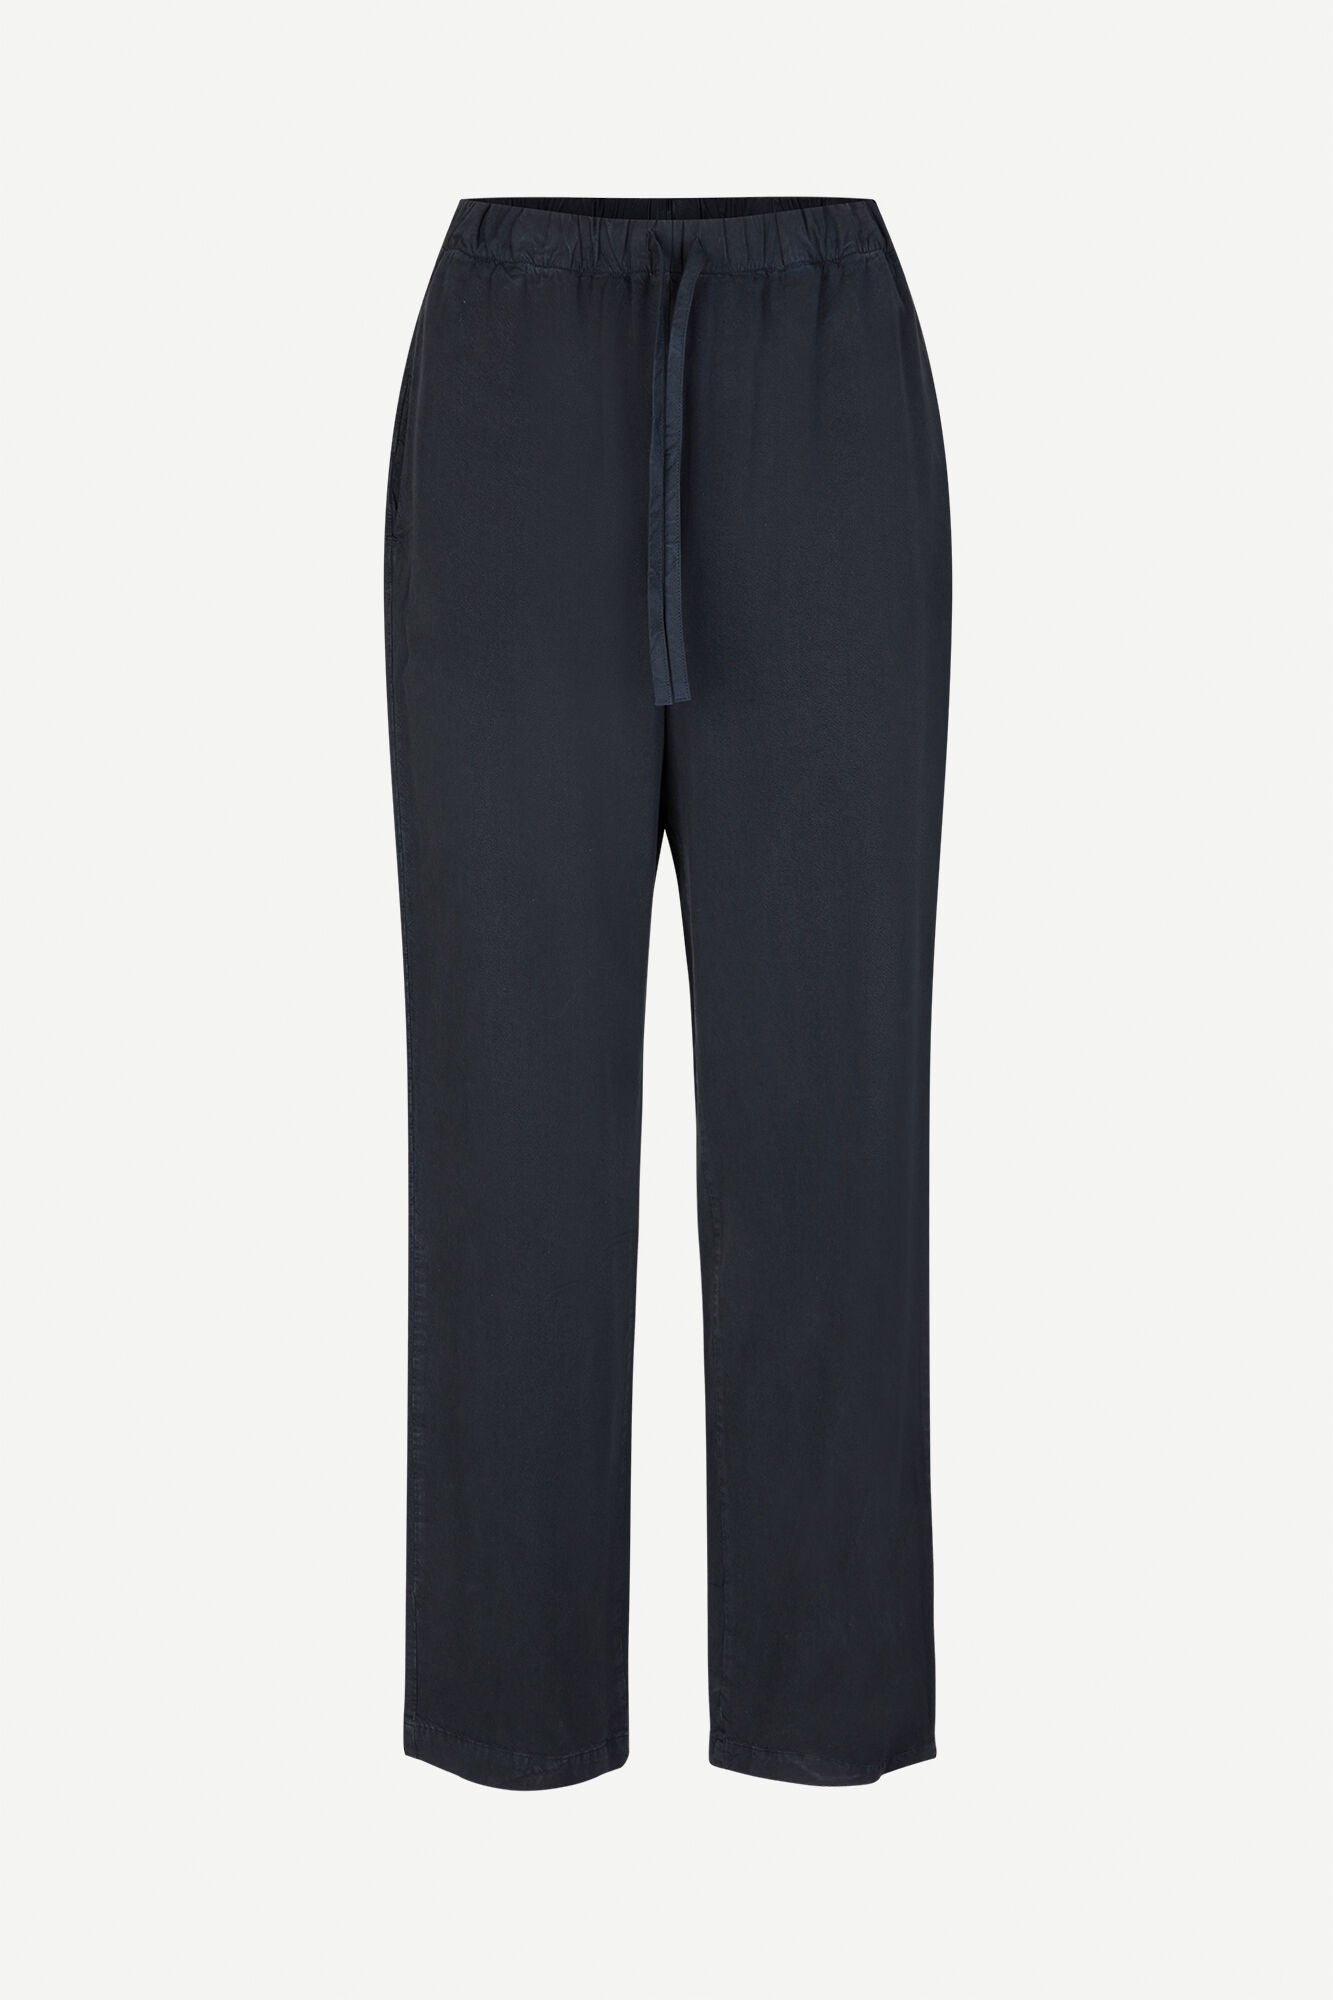 Soft drawstring pants in salute